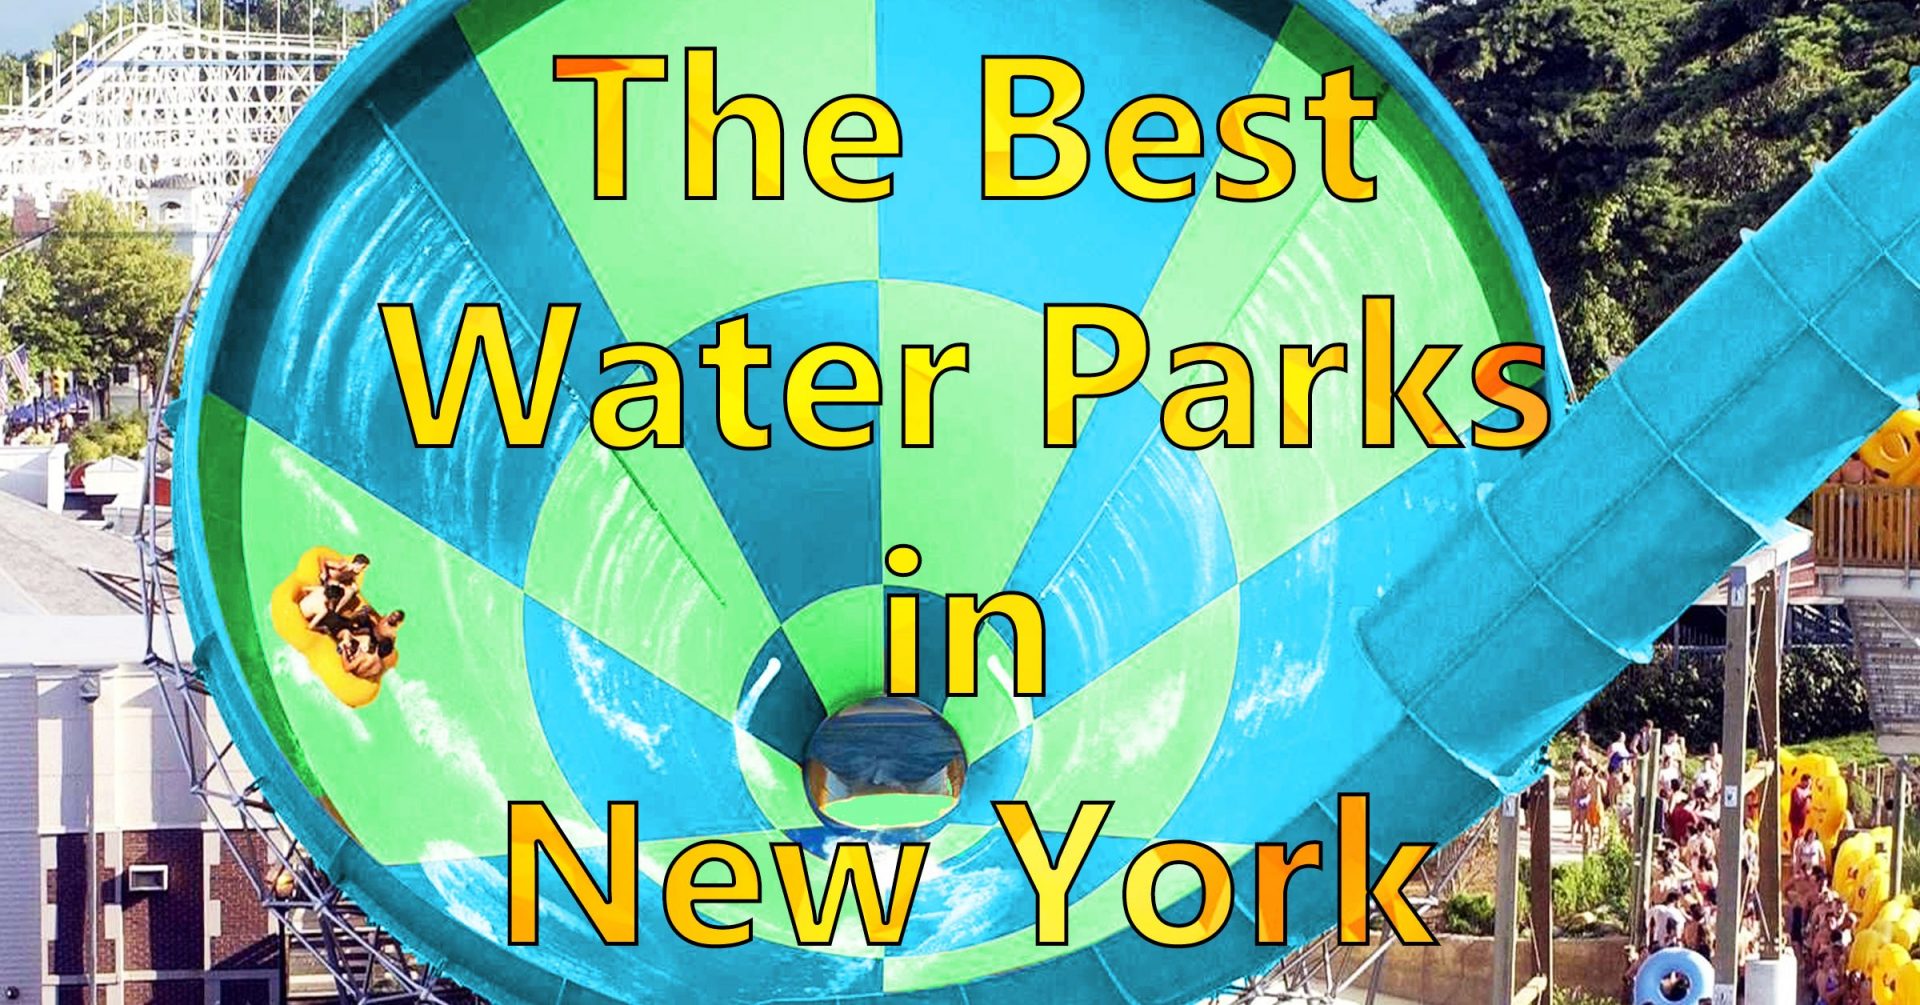 Best Water Parks In The New York